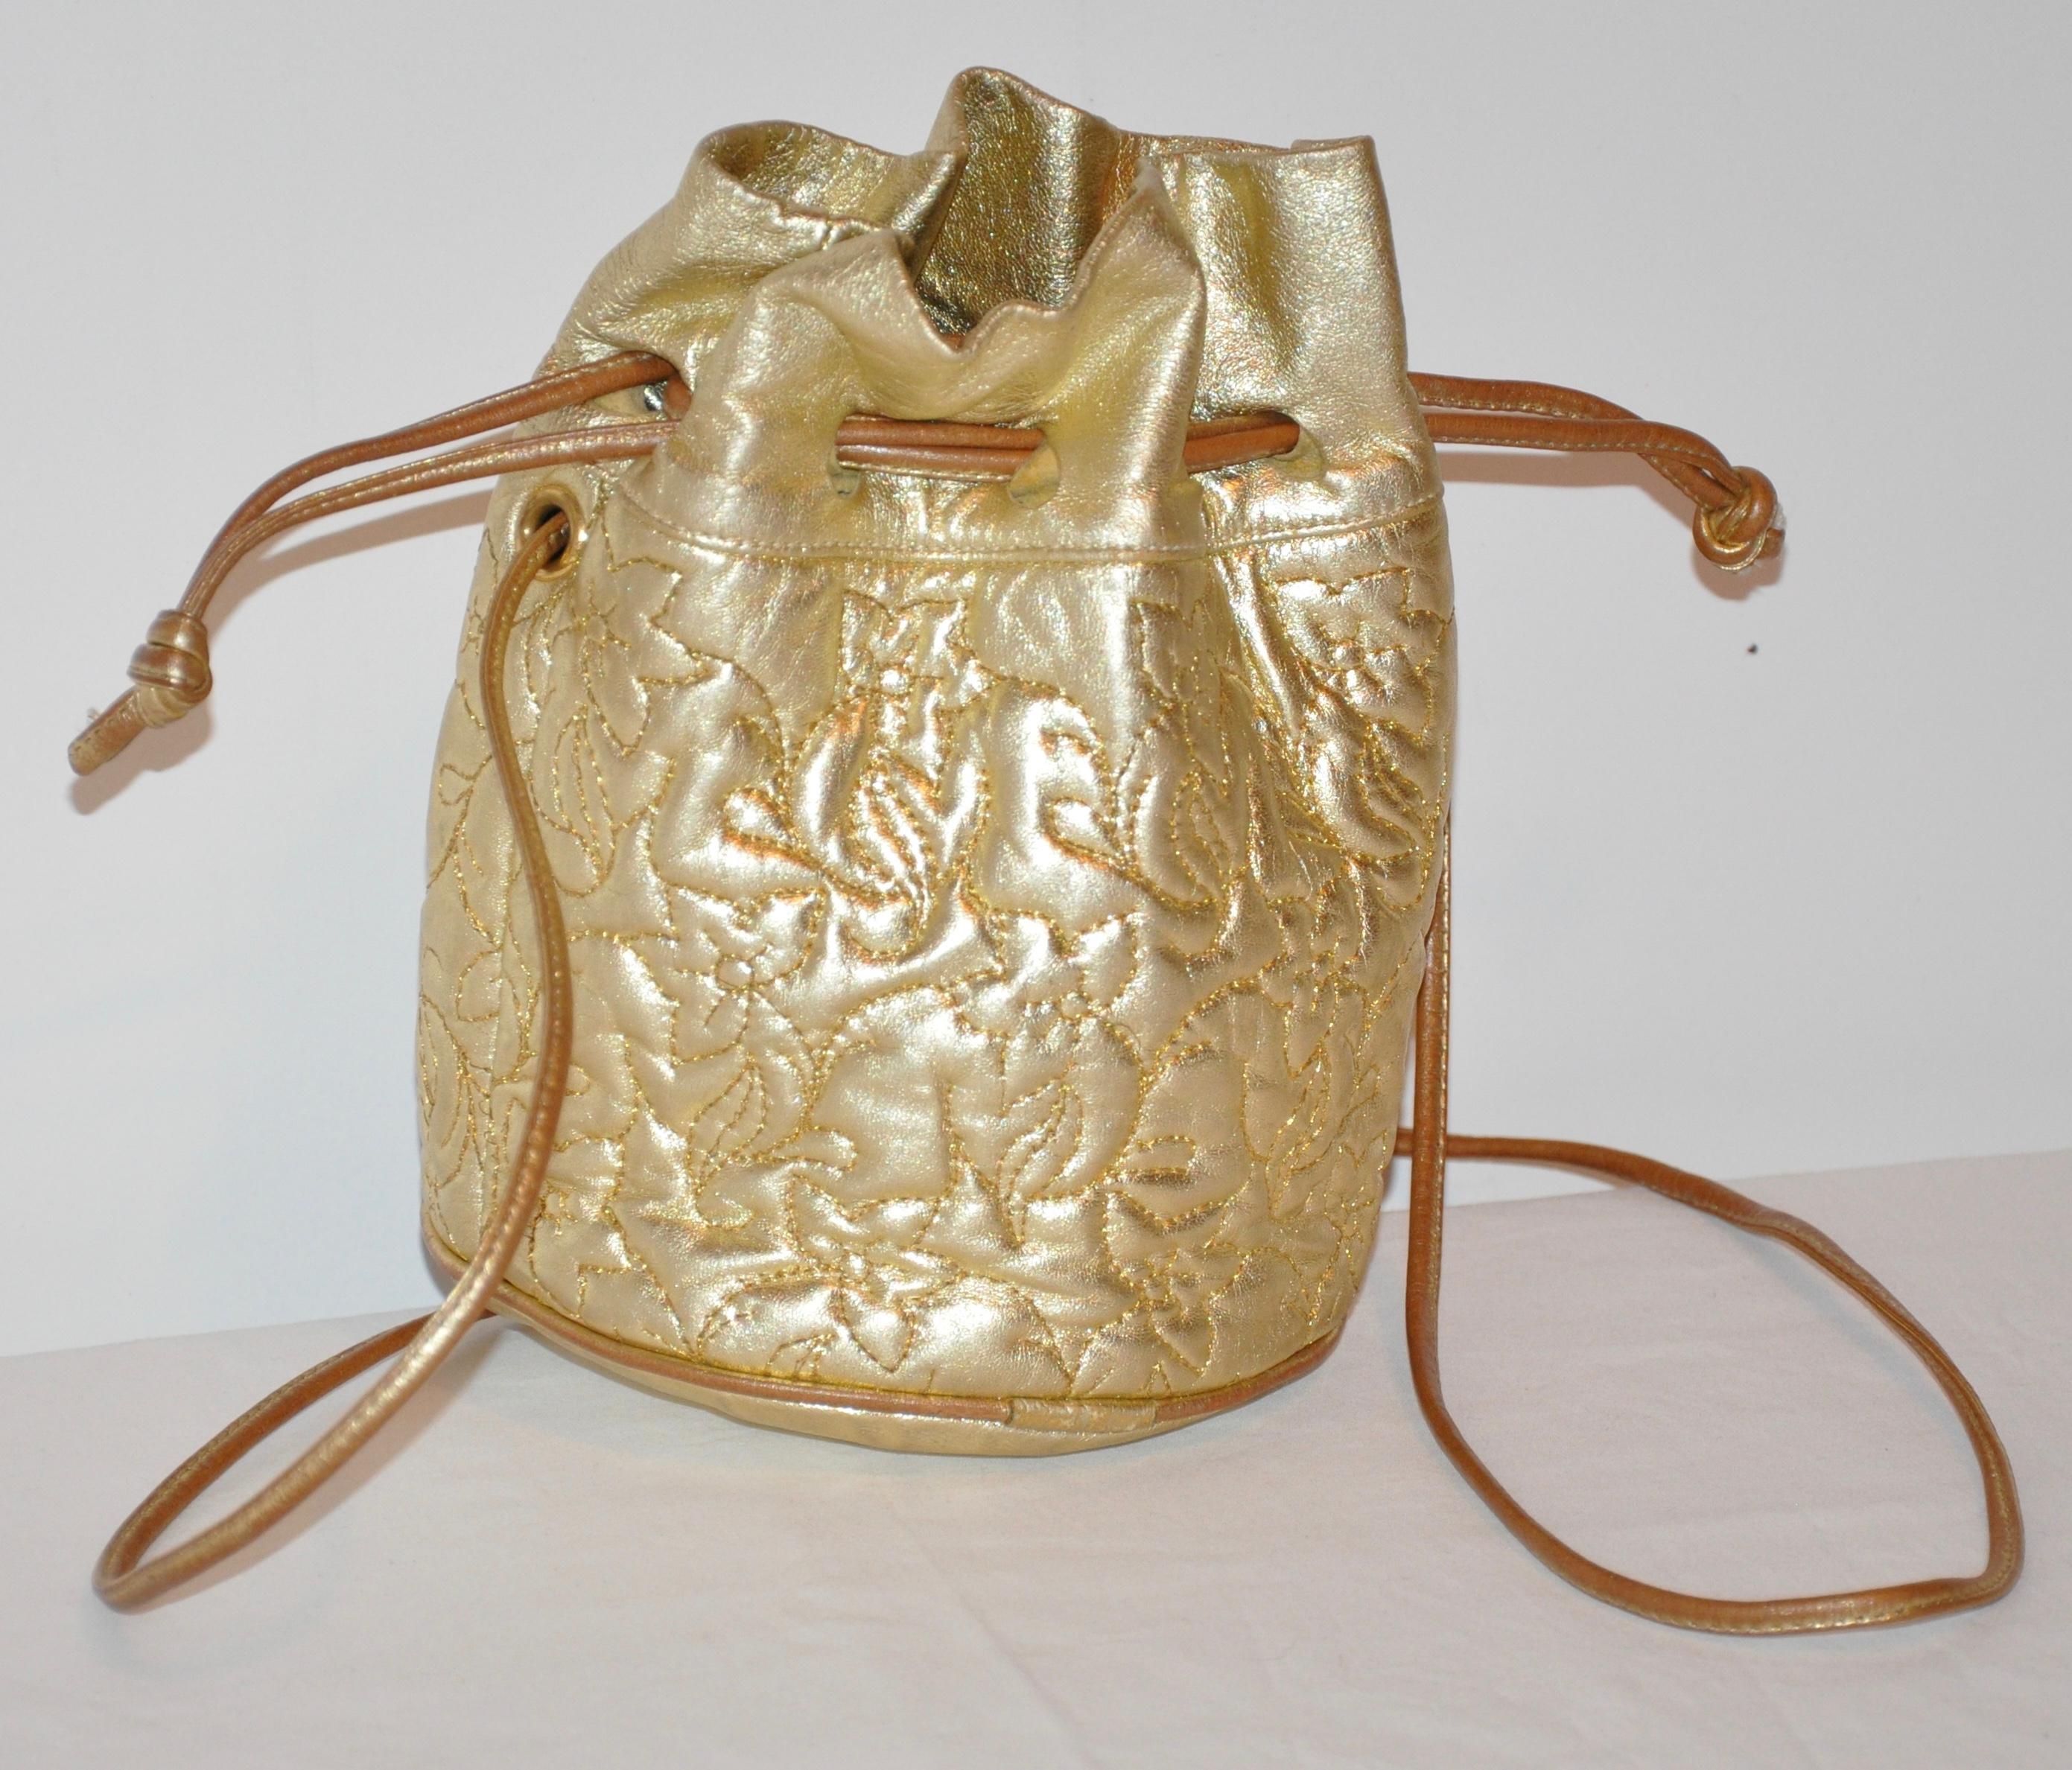     Elegant and whimsical metallic gold lambskin drawstring shoulder bag is detailed with floral-design topstitching. The interior is lined in black. Drawstring as well as the shoulder straps are of metallic lambskin. The bottom base measures 6